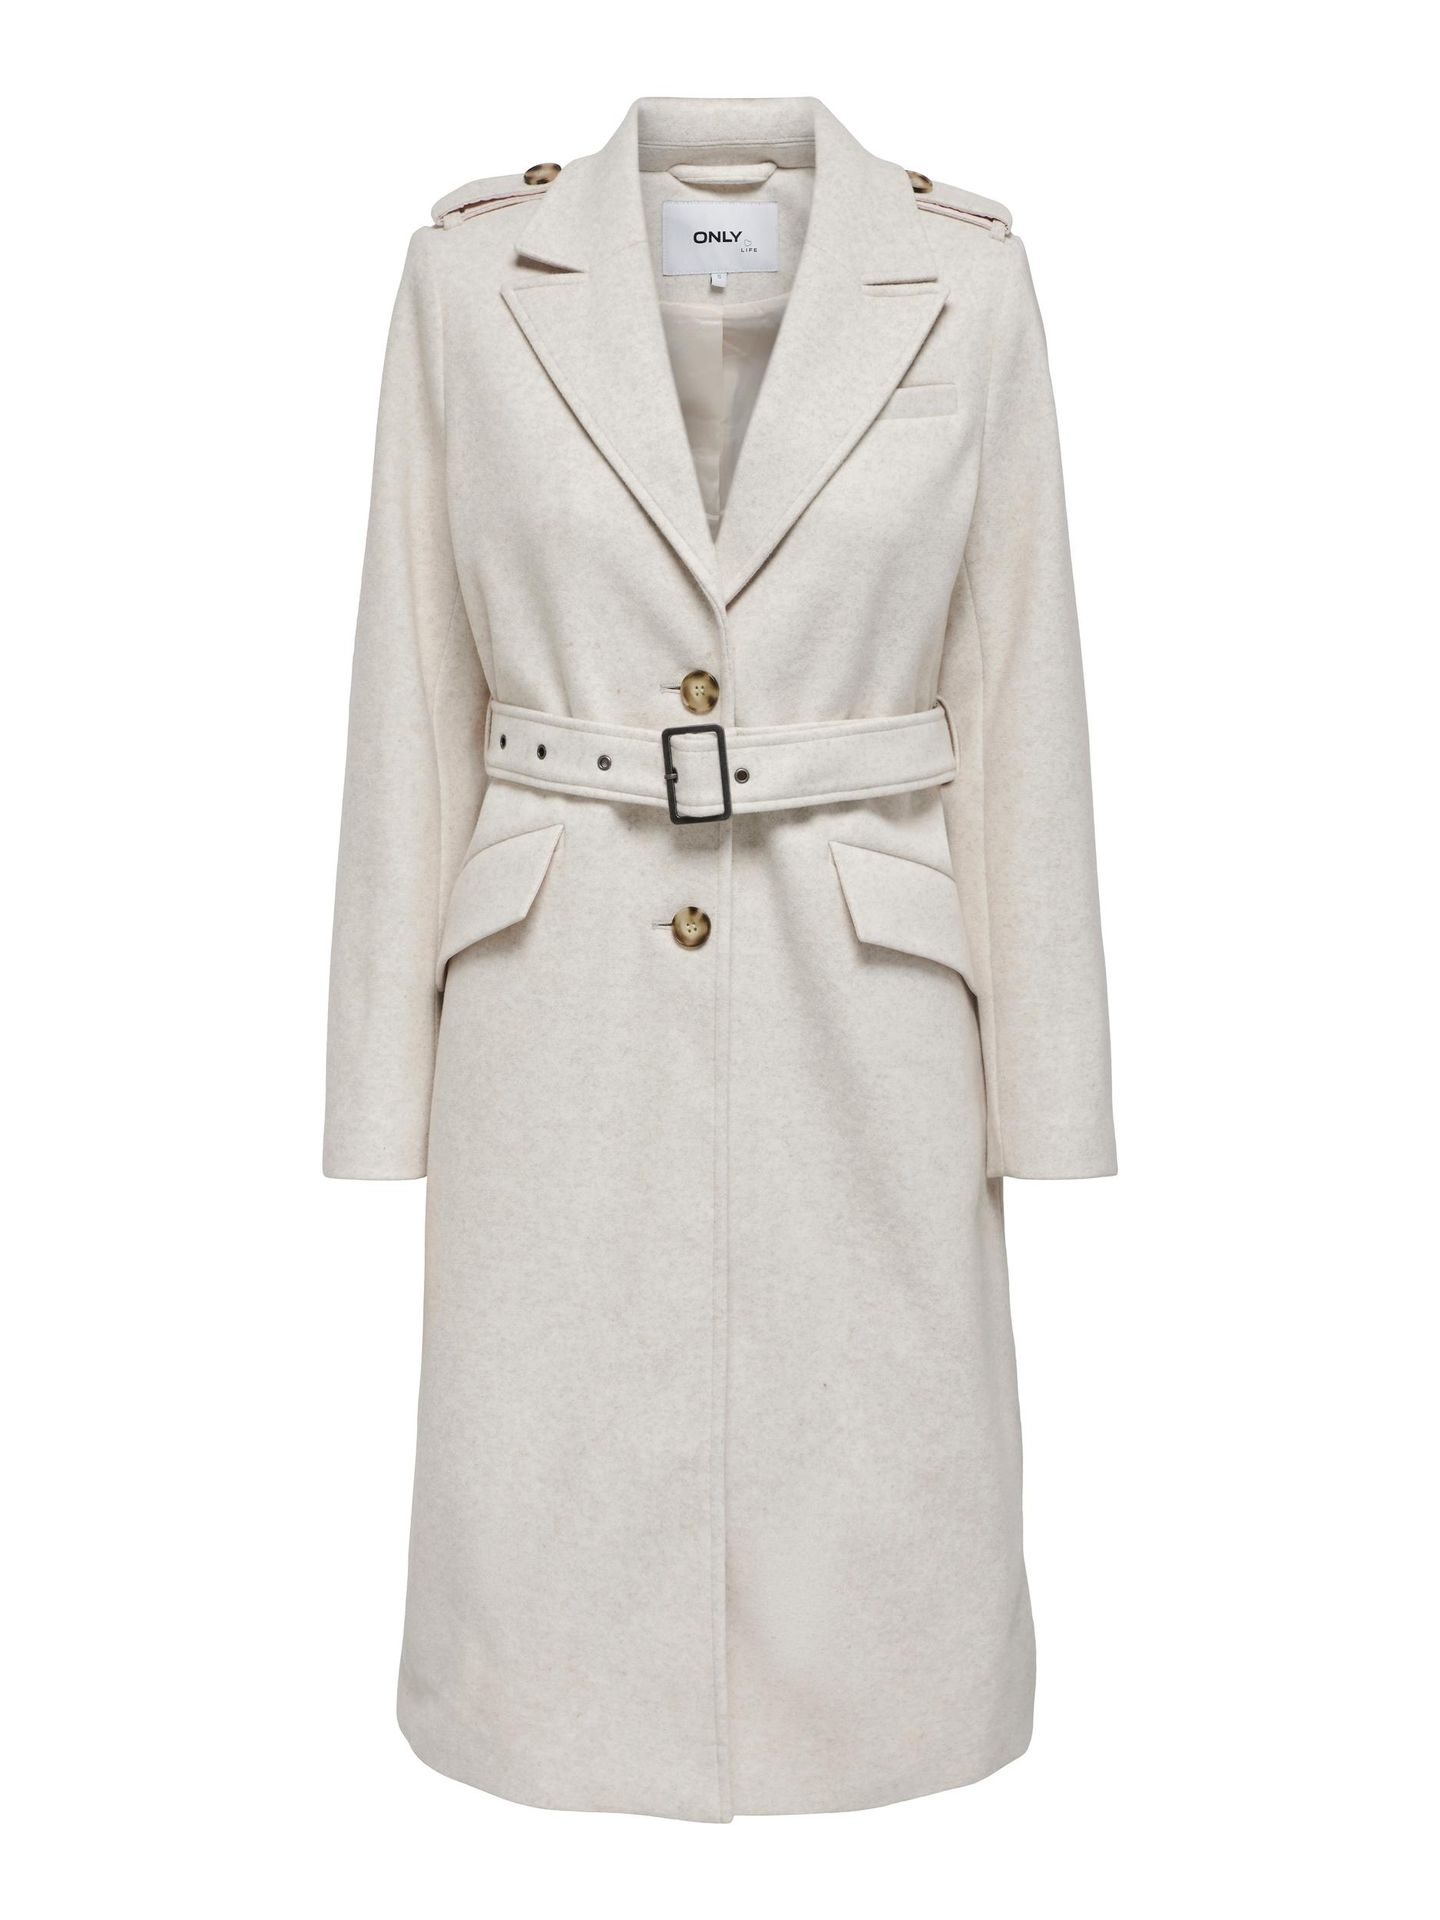 ONLSIF only BELTED CC COAT LIFE | FILIPPA